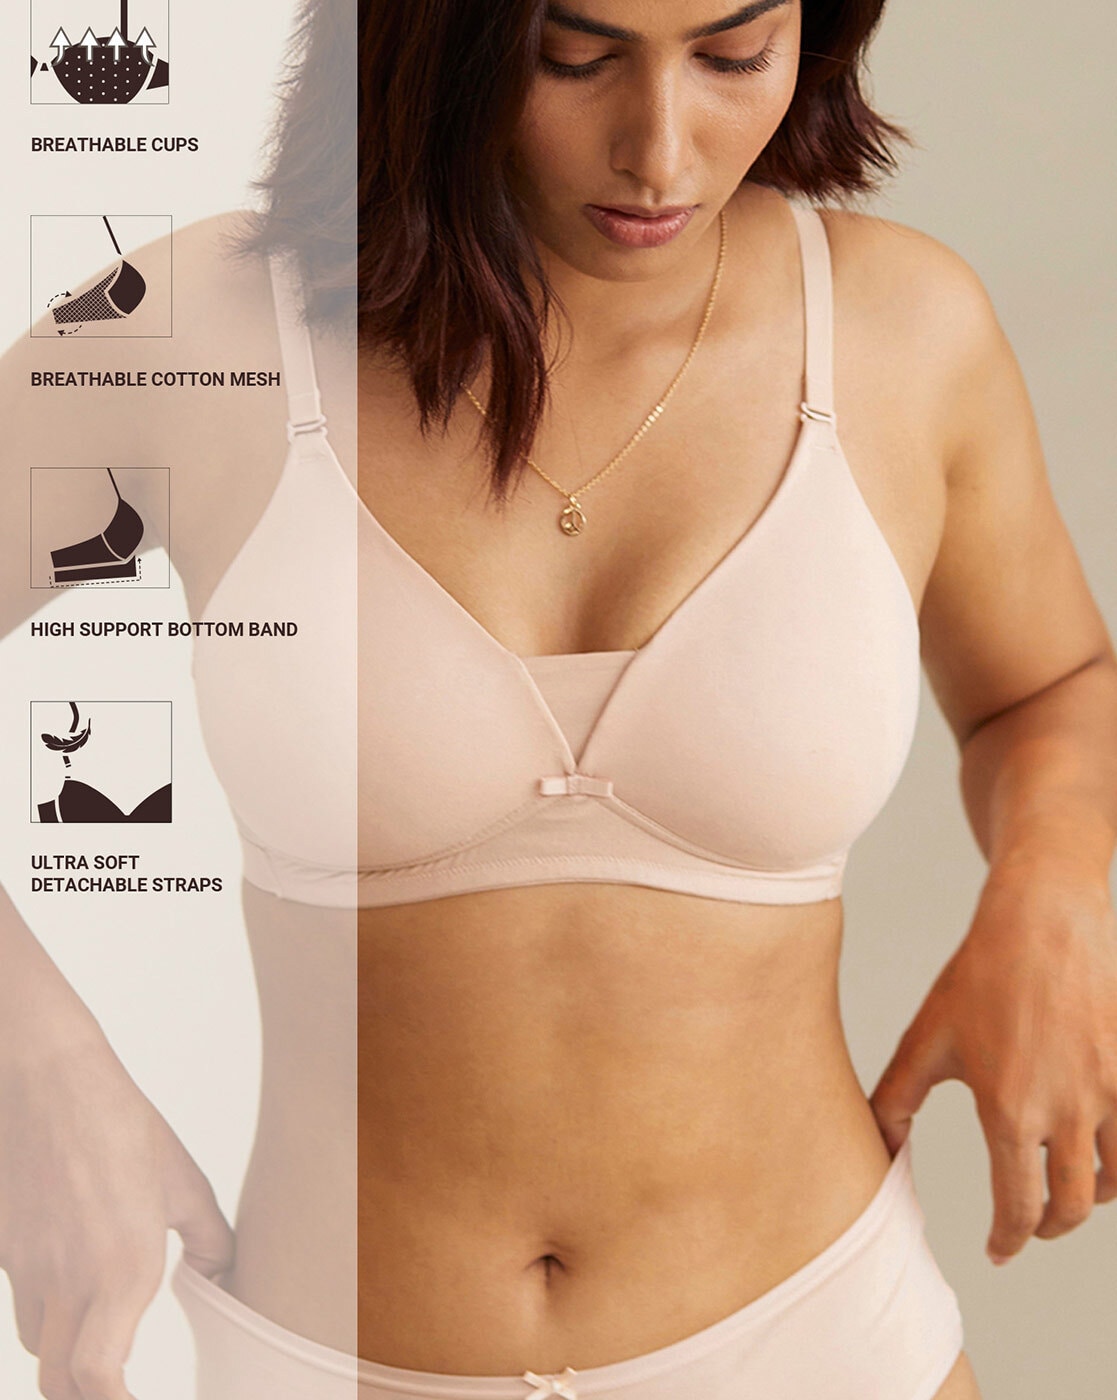 Nude Self Design Non Wired Padded Sheer Bra 6390700.htm - Buy Nude Self  Design Non Wired Padded Sheer Bra 6390700.htm online in India